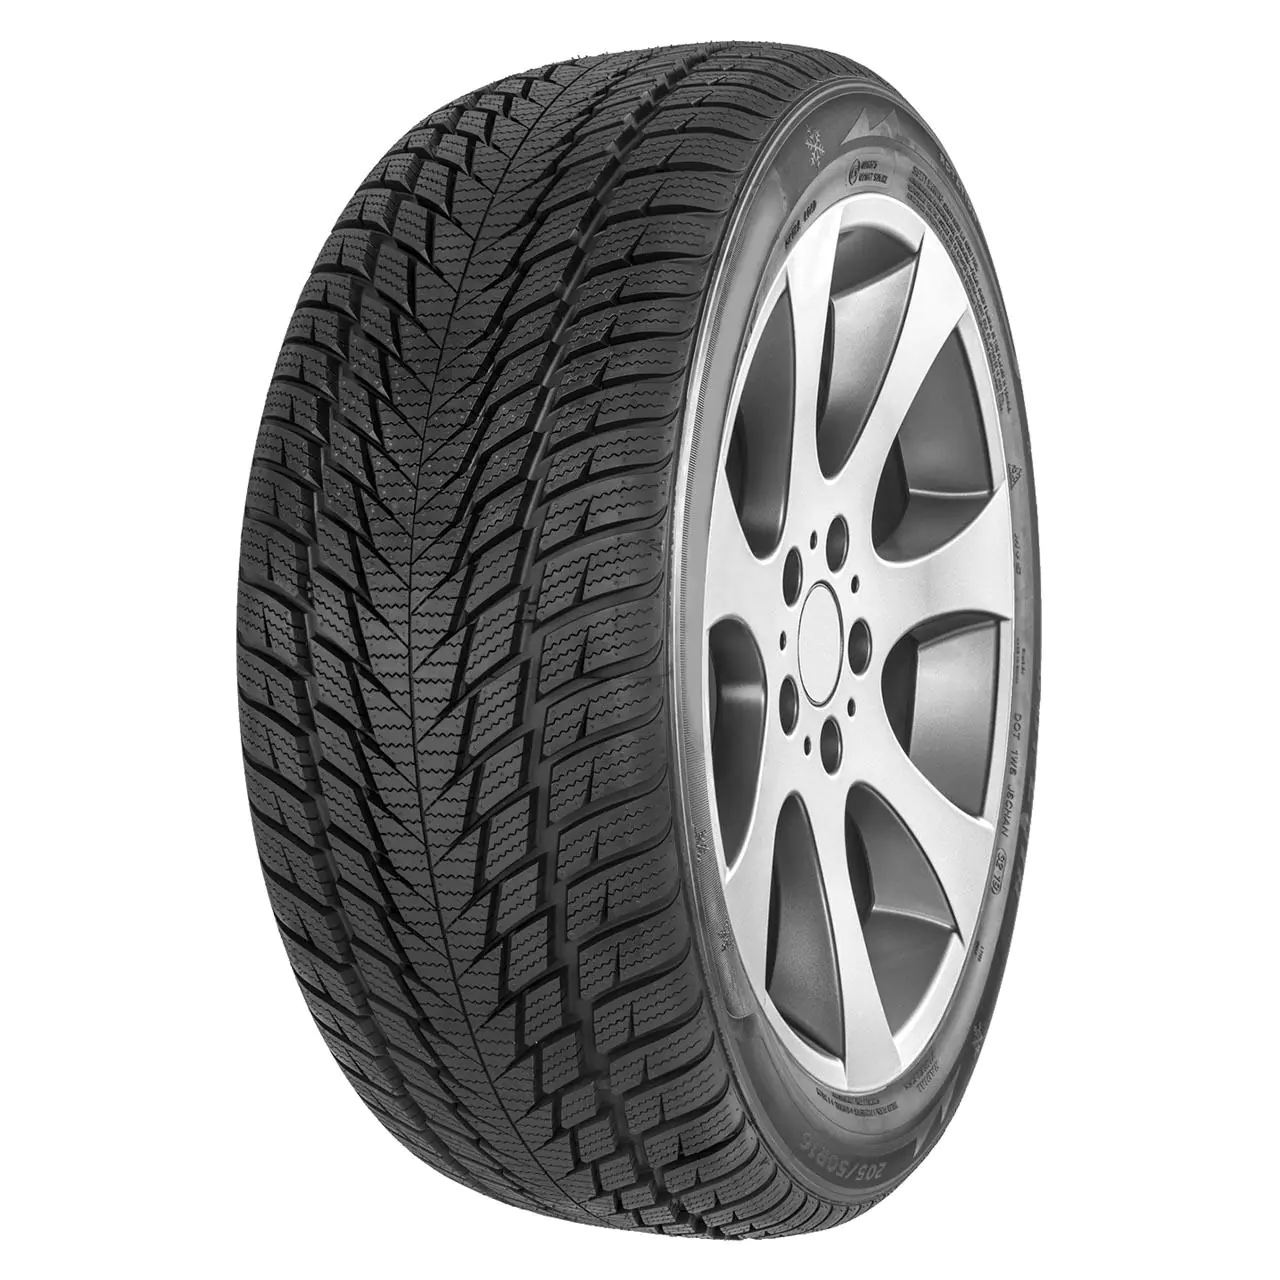 Gomme Autovettura Fortuna 205/40 R17 84V GOWIN UHP2 XL M+S Invernale